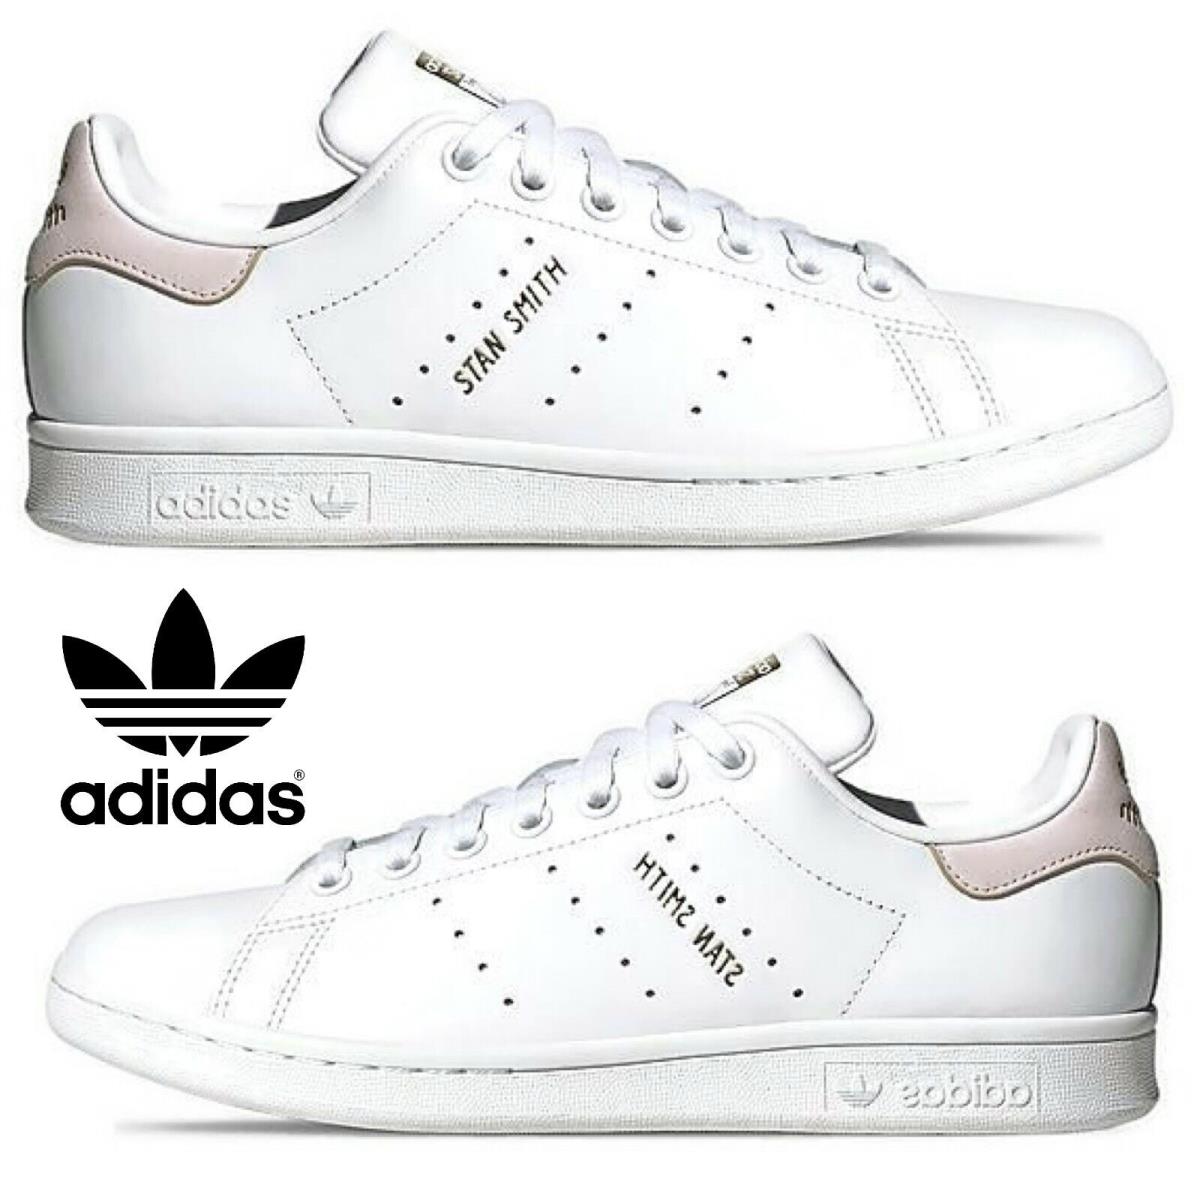 Adidas Originals Stan Smith Women s Sneakers Casual Shoes Sport Gym Pink White